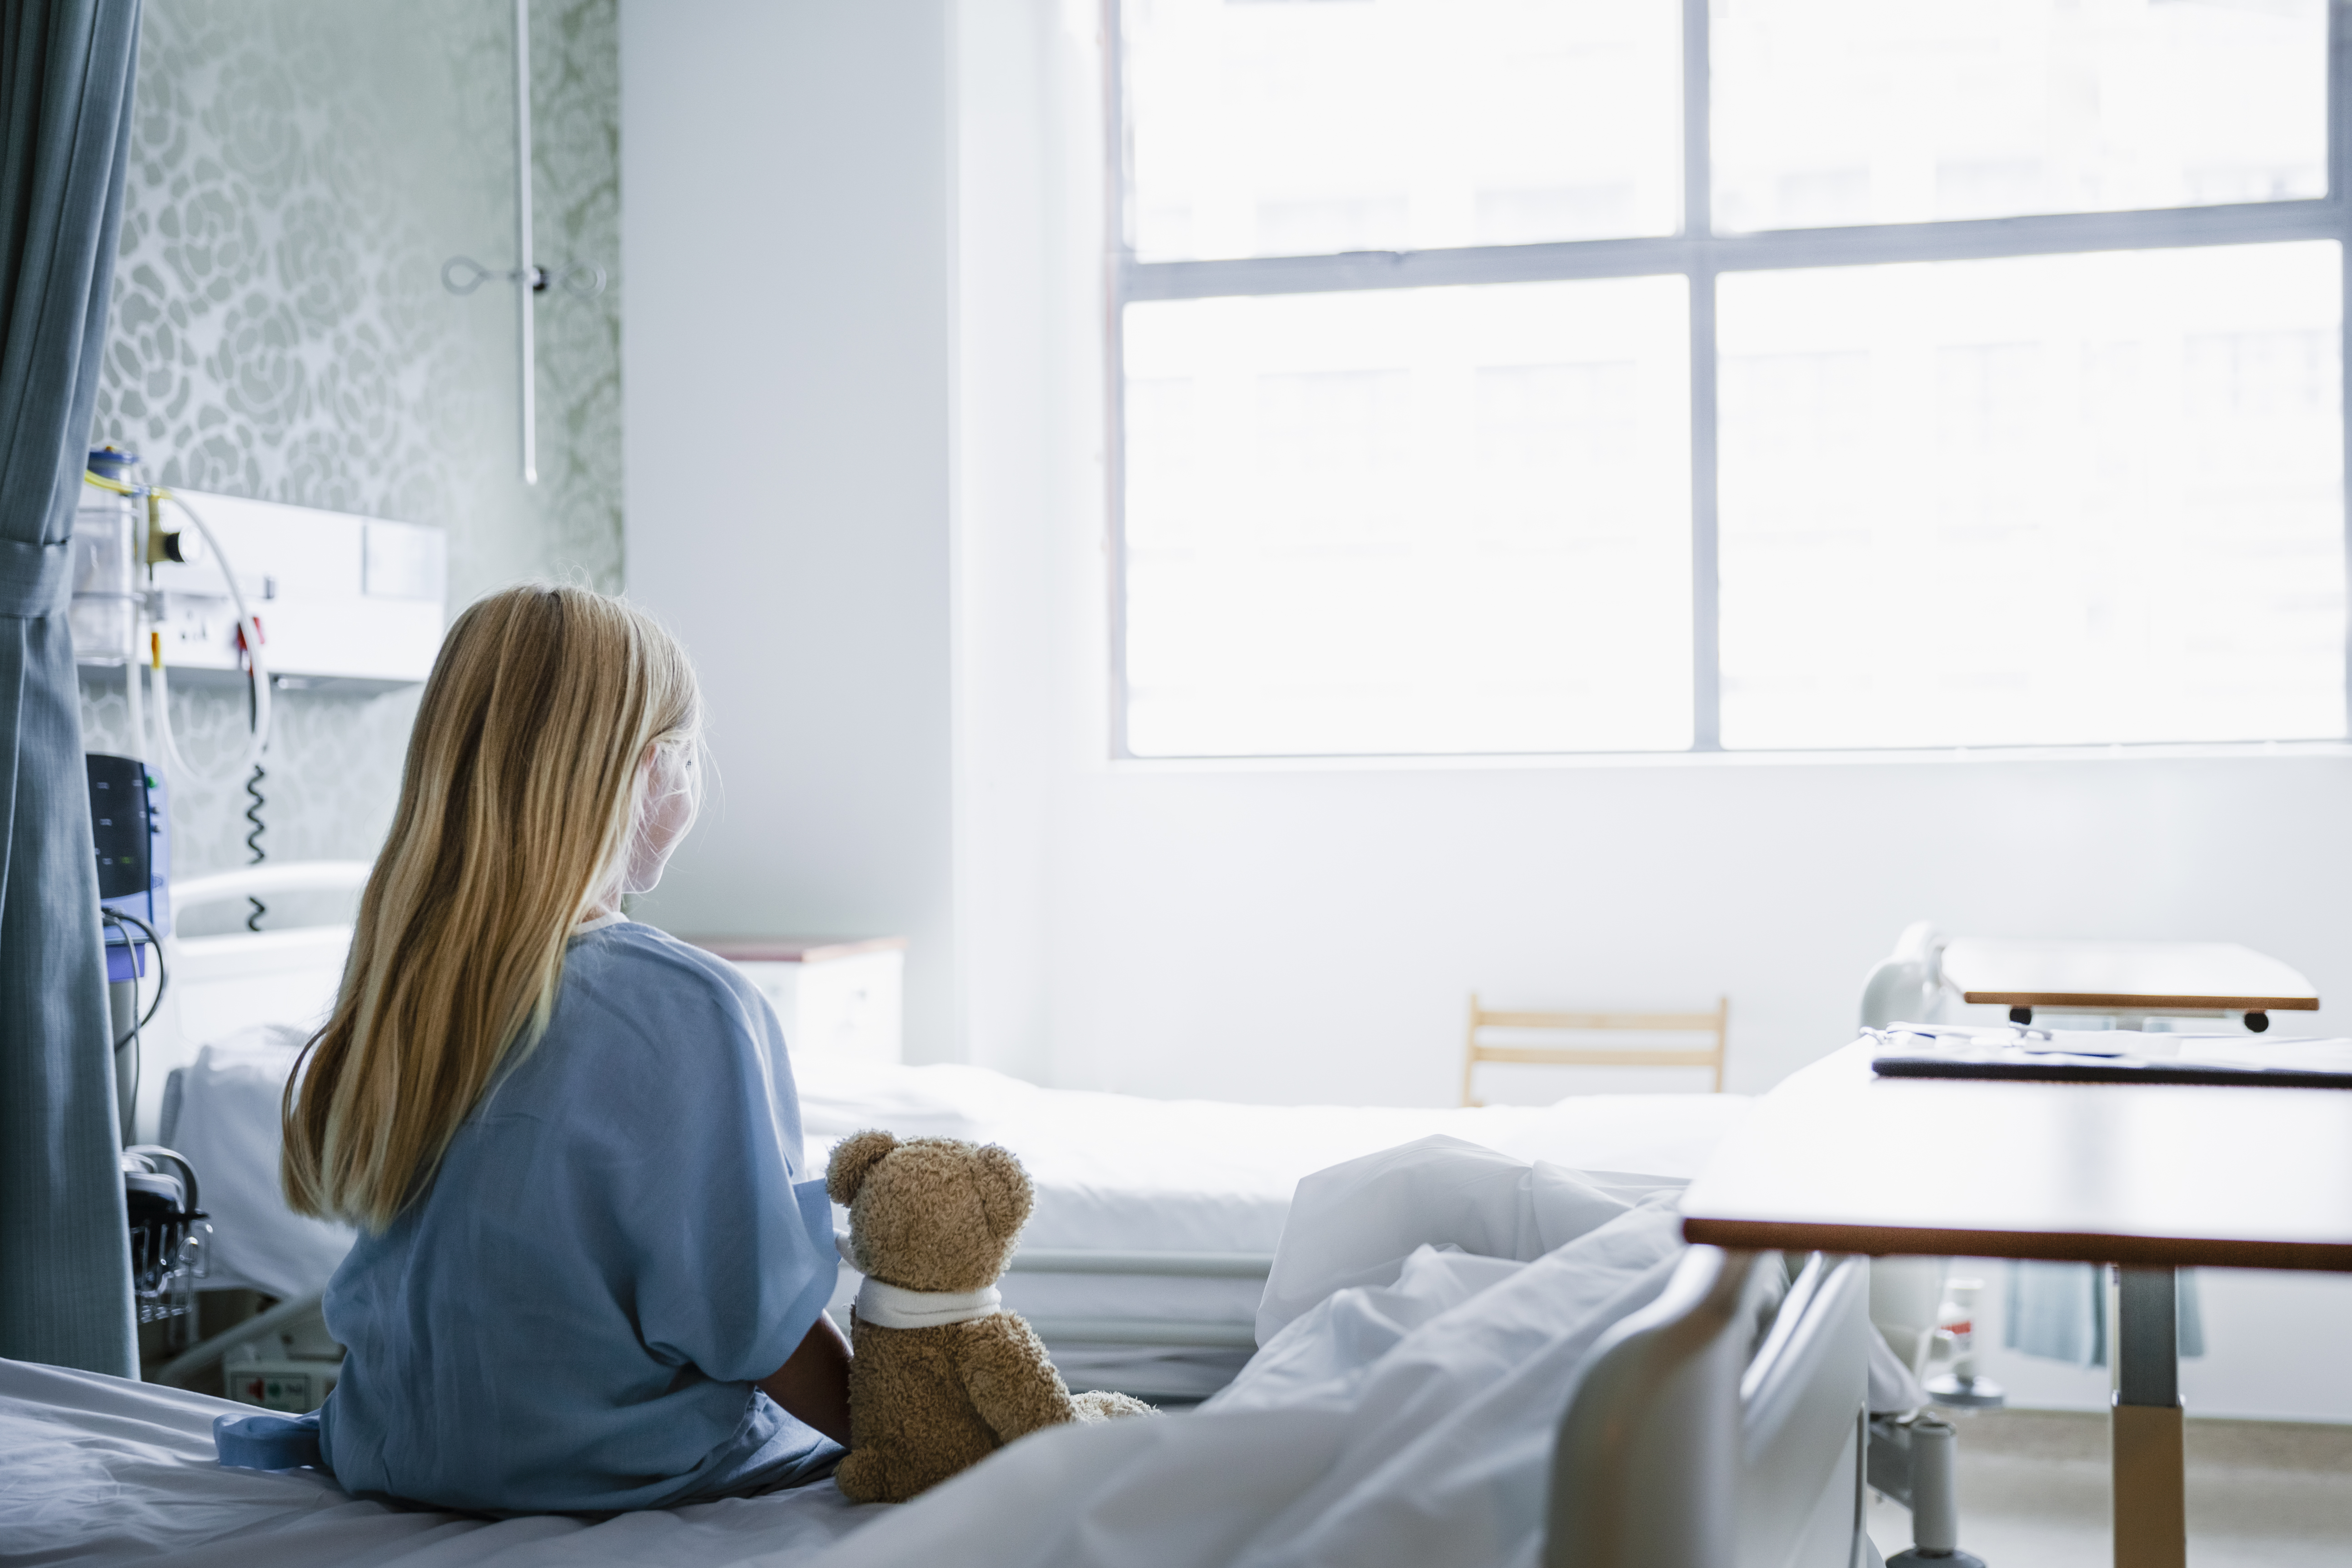 Girl in a hospital | Source: Getty Images